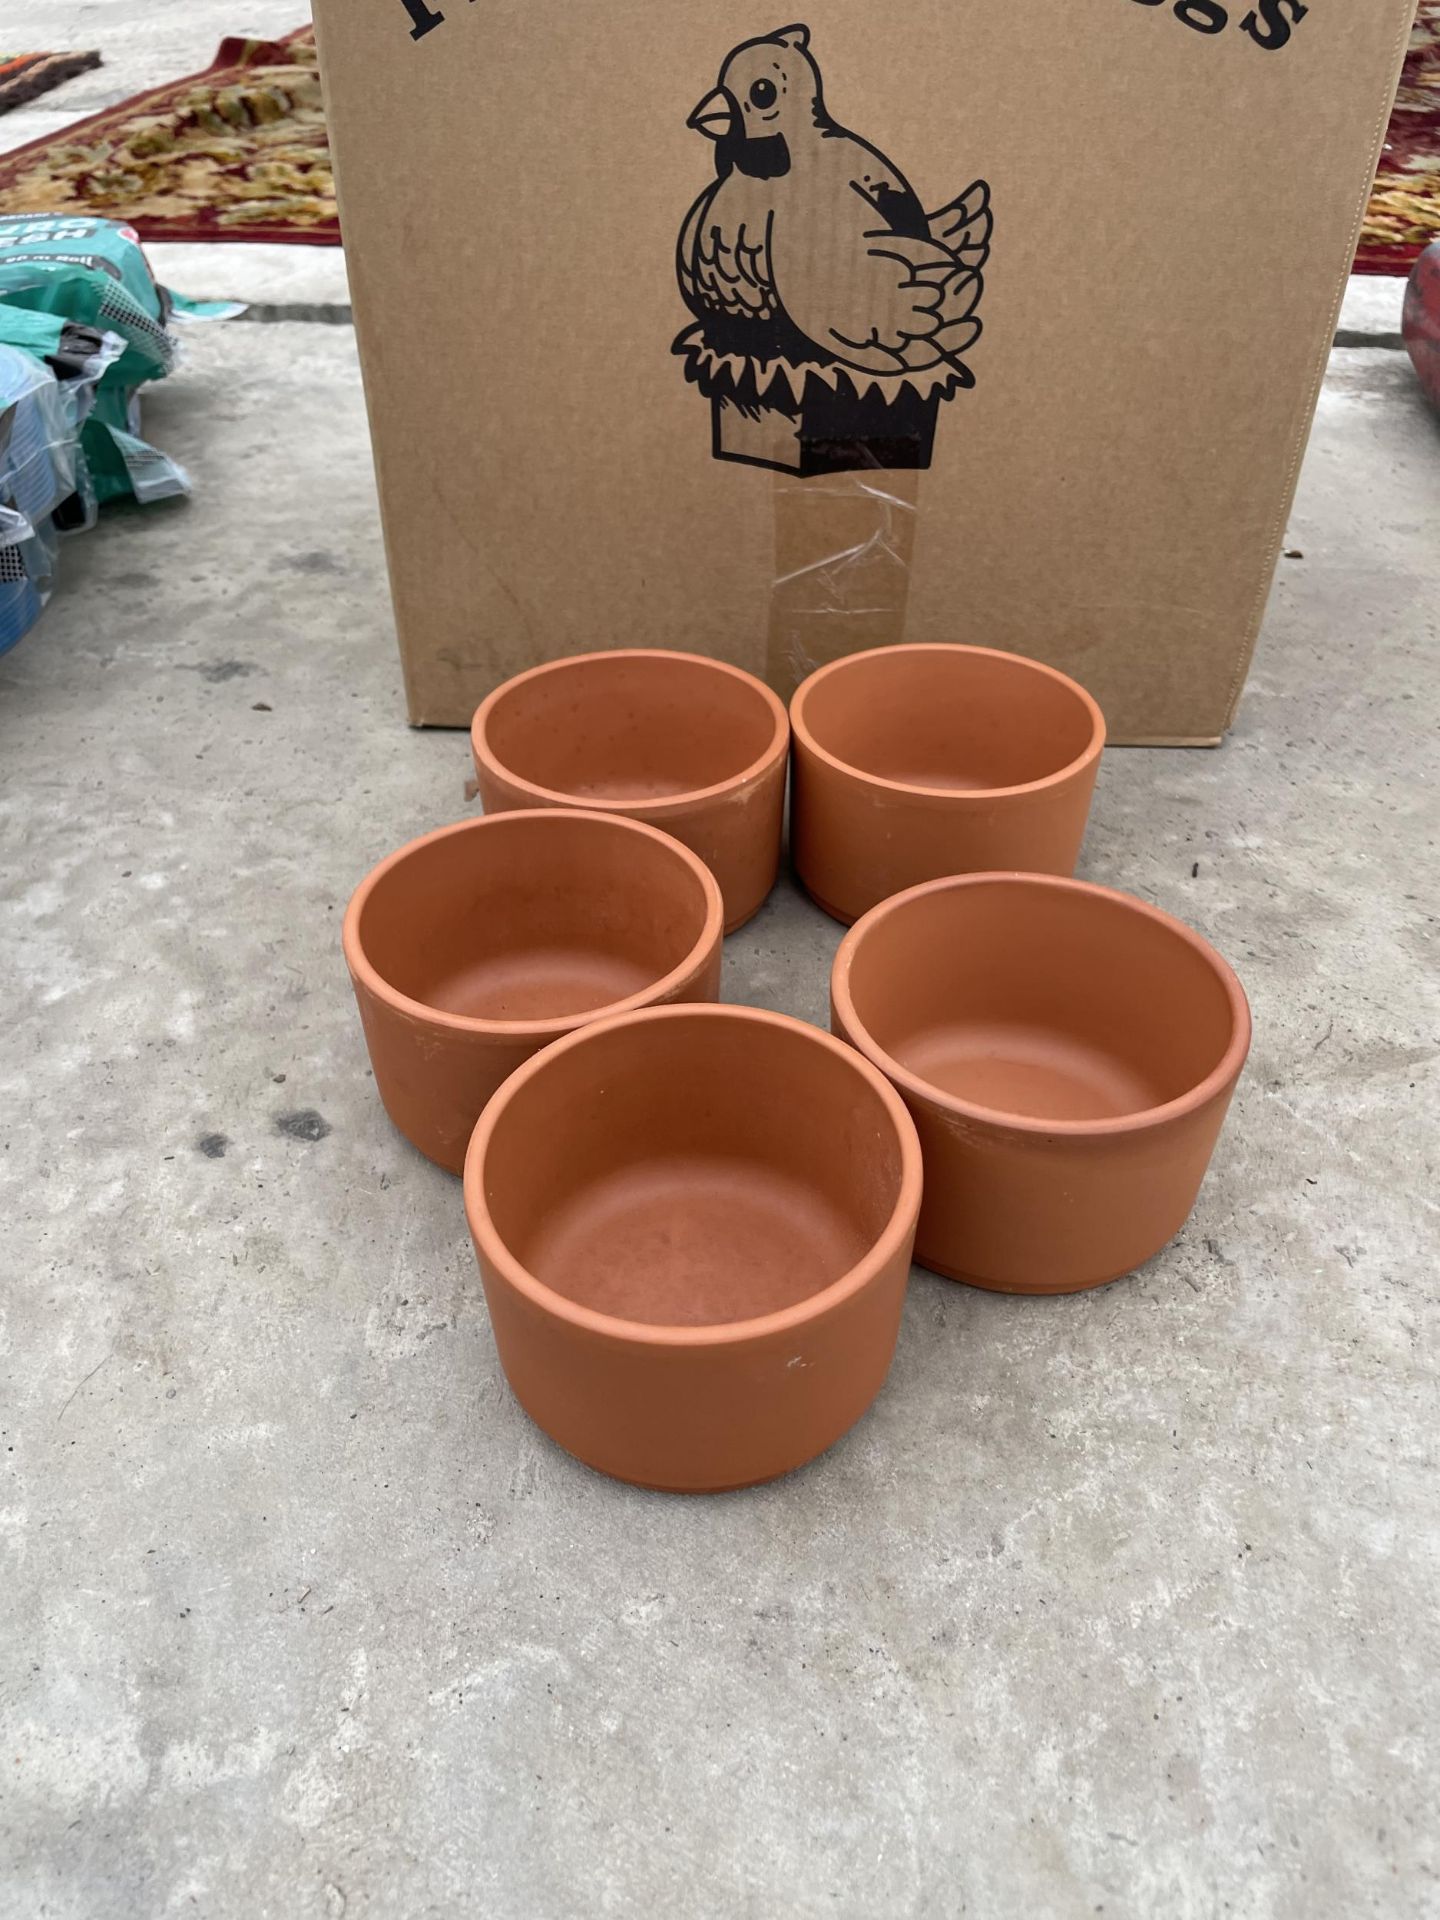 A LARGE QUANTITY OF TERACOTTA PIGEON POTS - Image 2 of 4